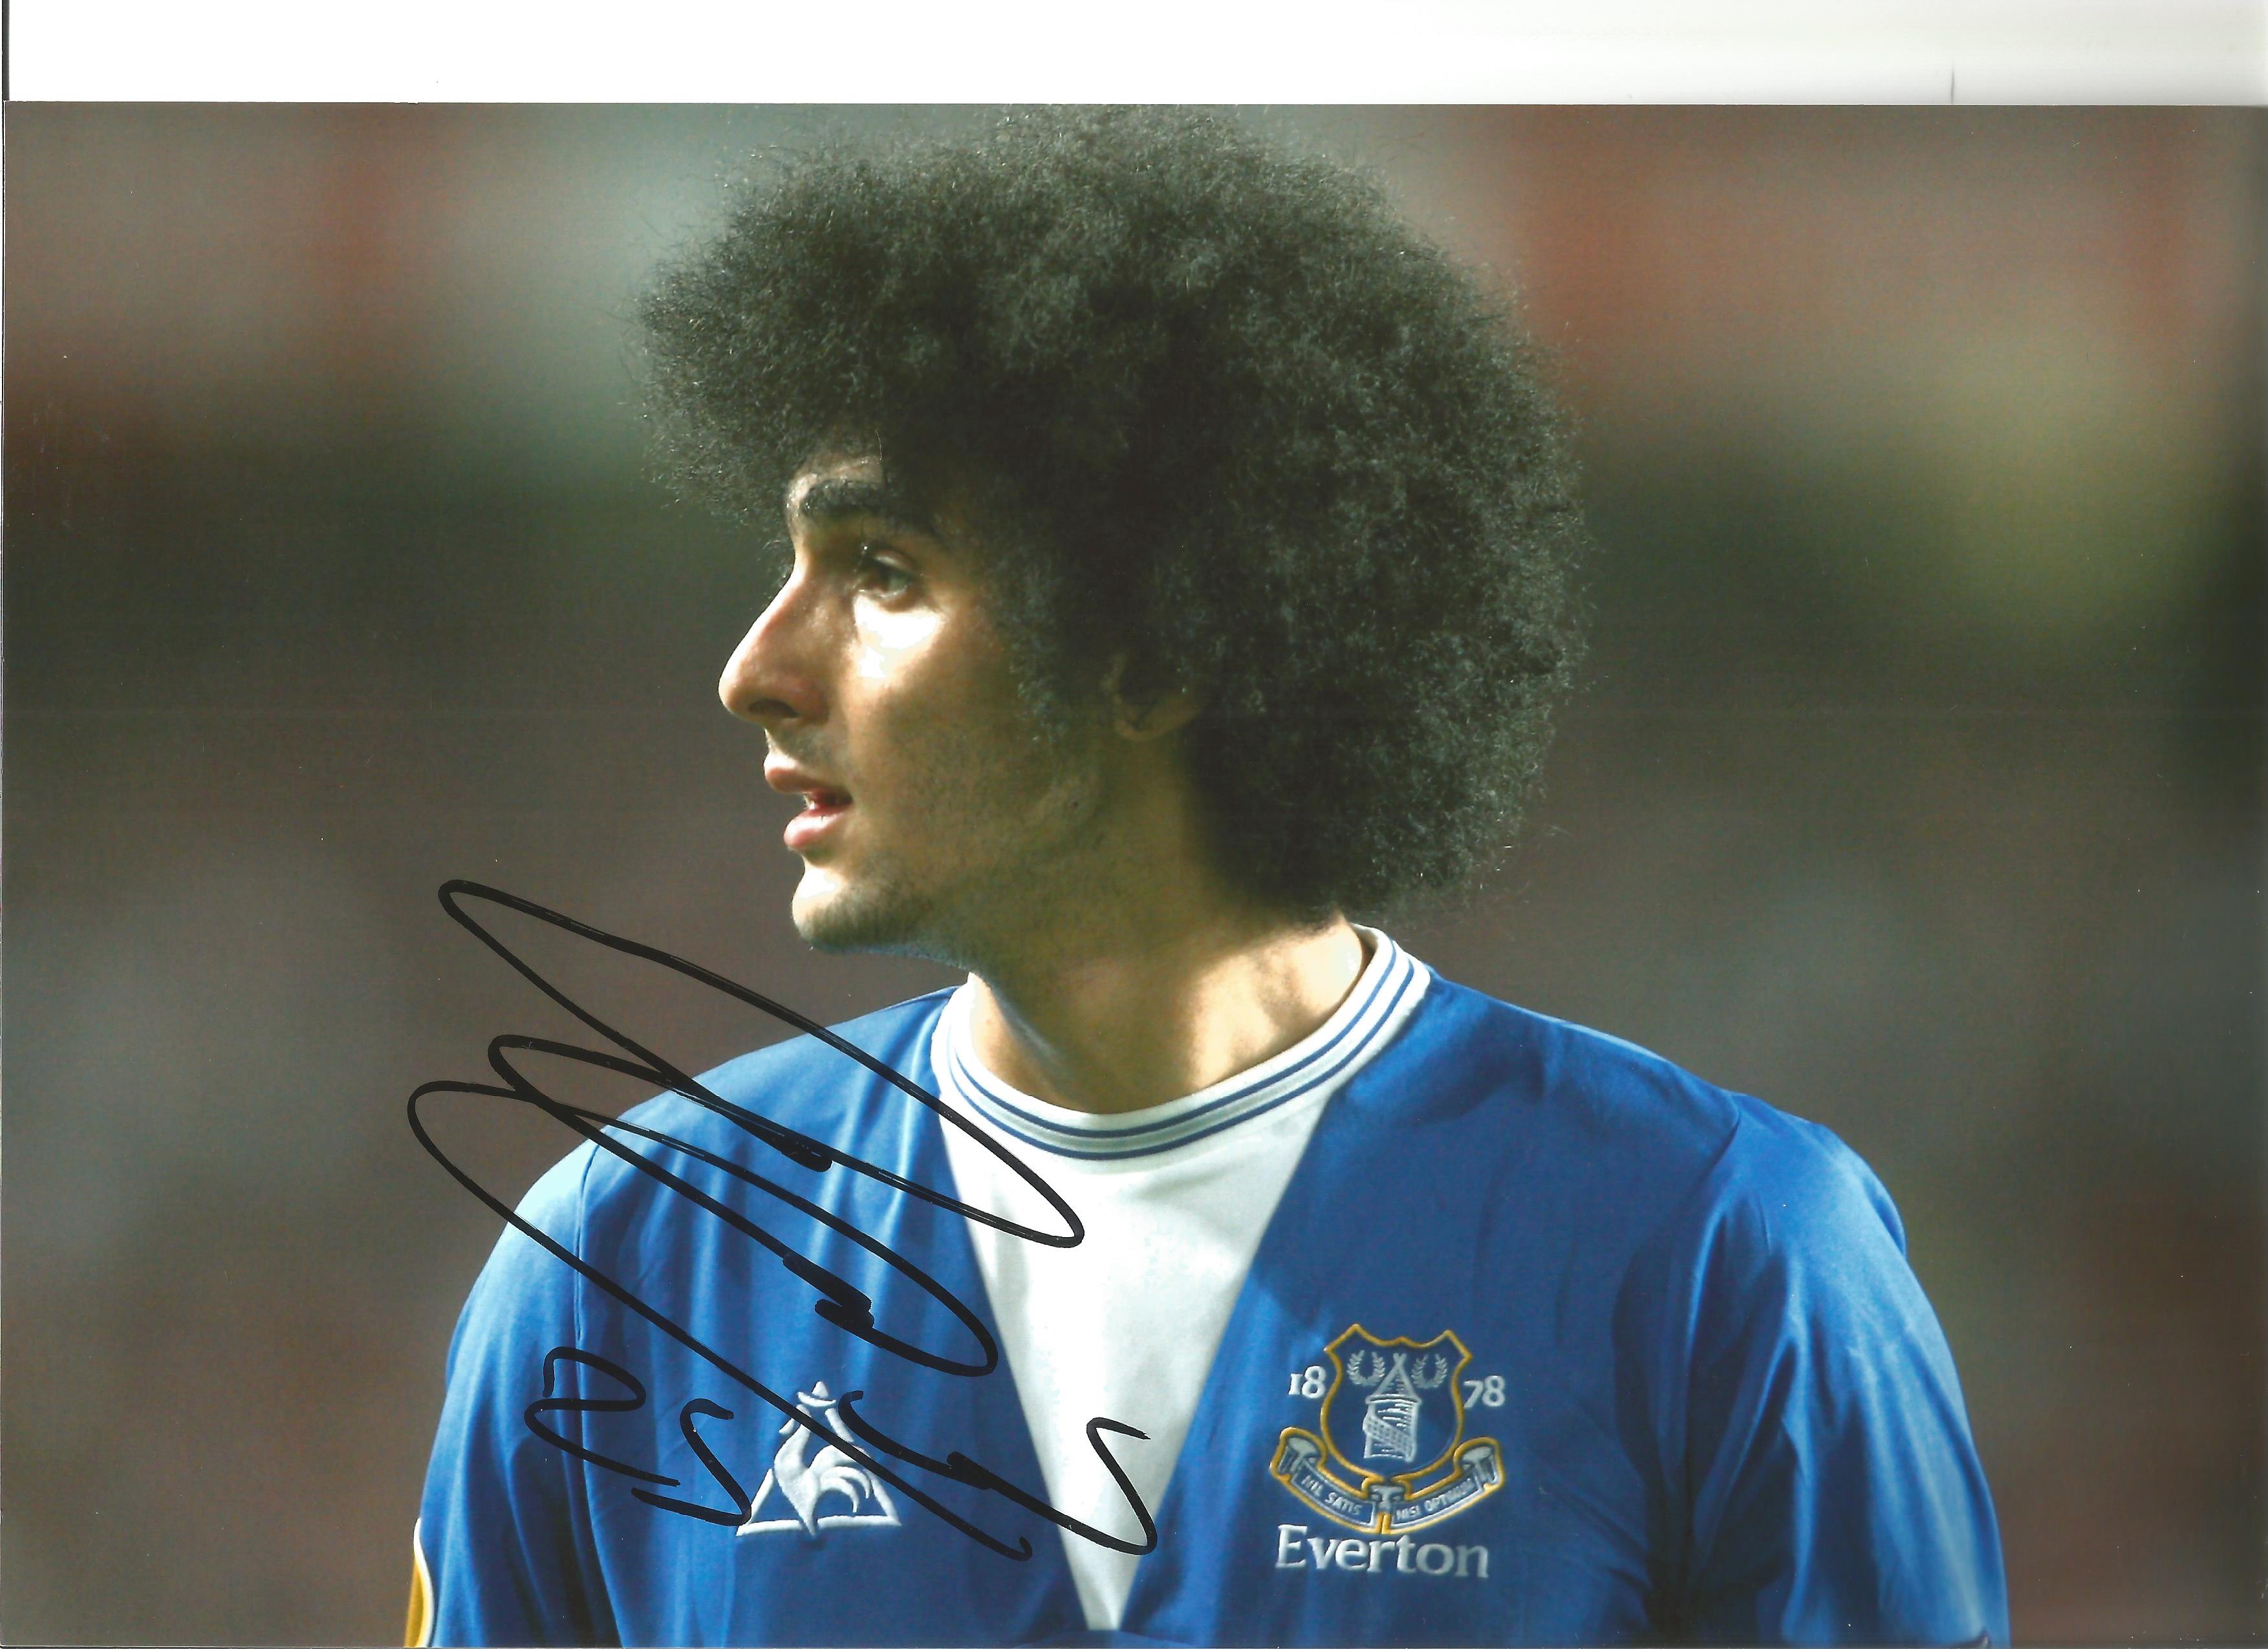 Marouane Fellaini Everton Signed 12 x 8 inch football photo. This item is from the stock of www.